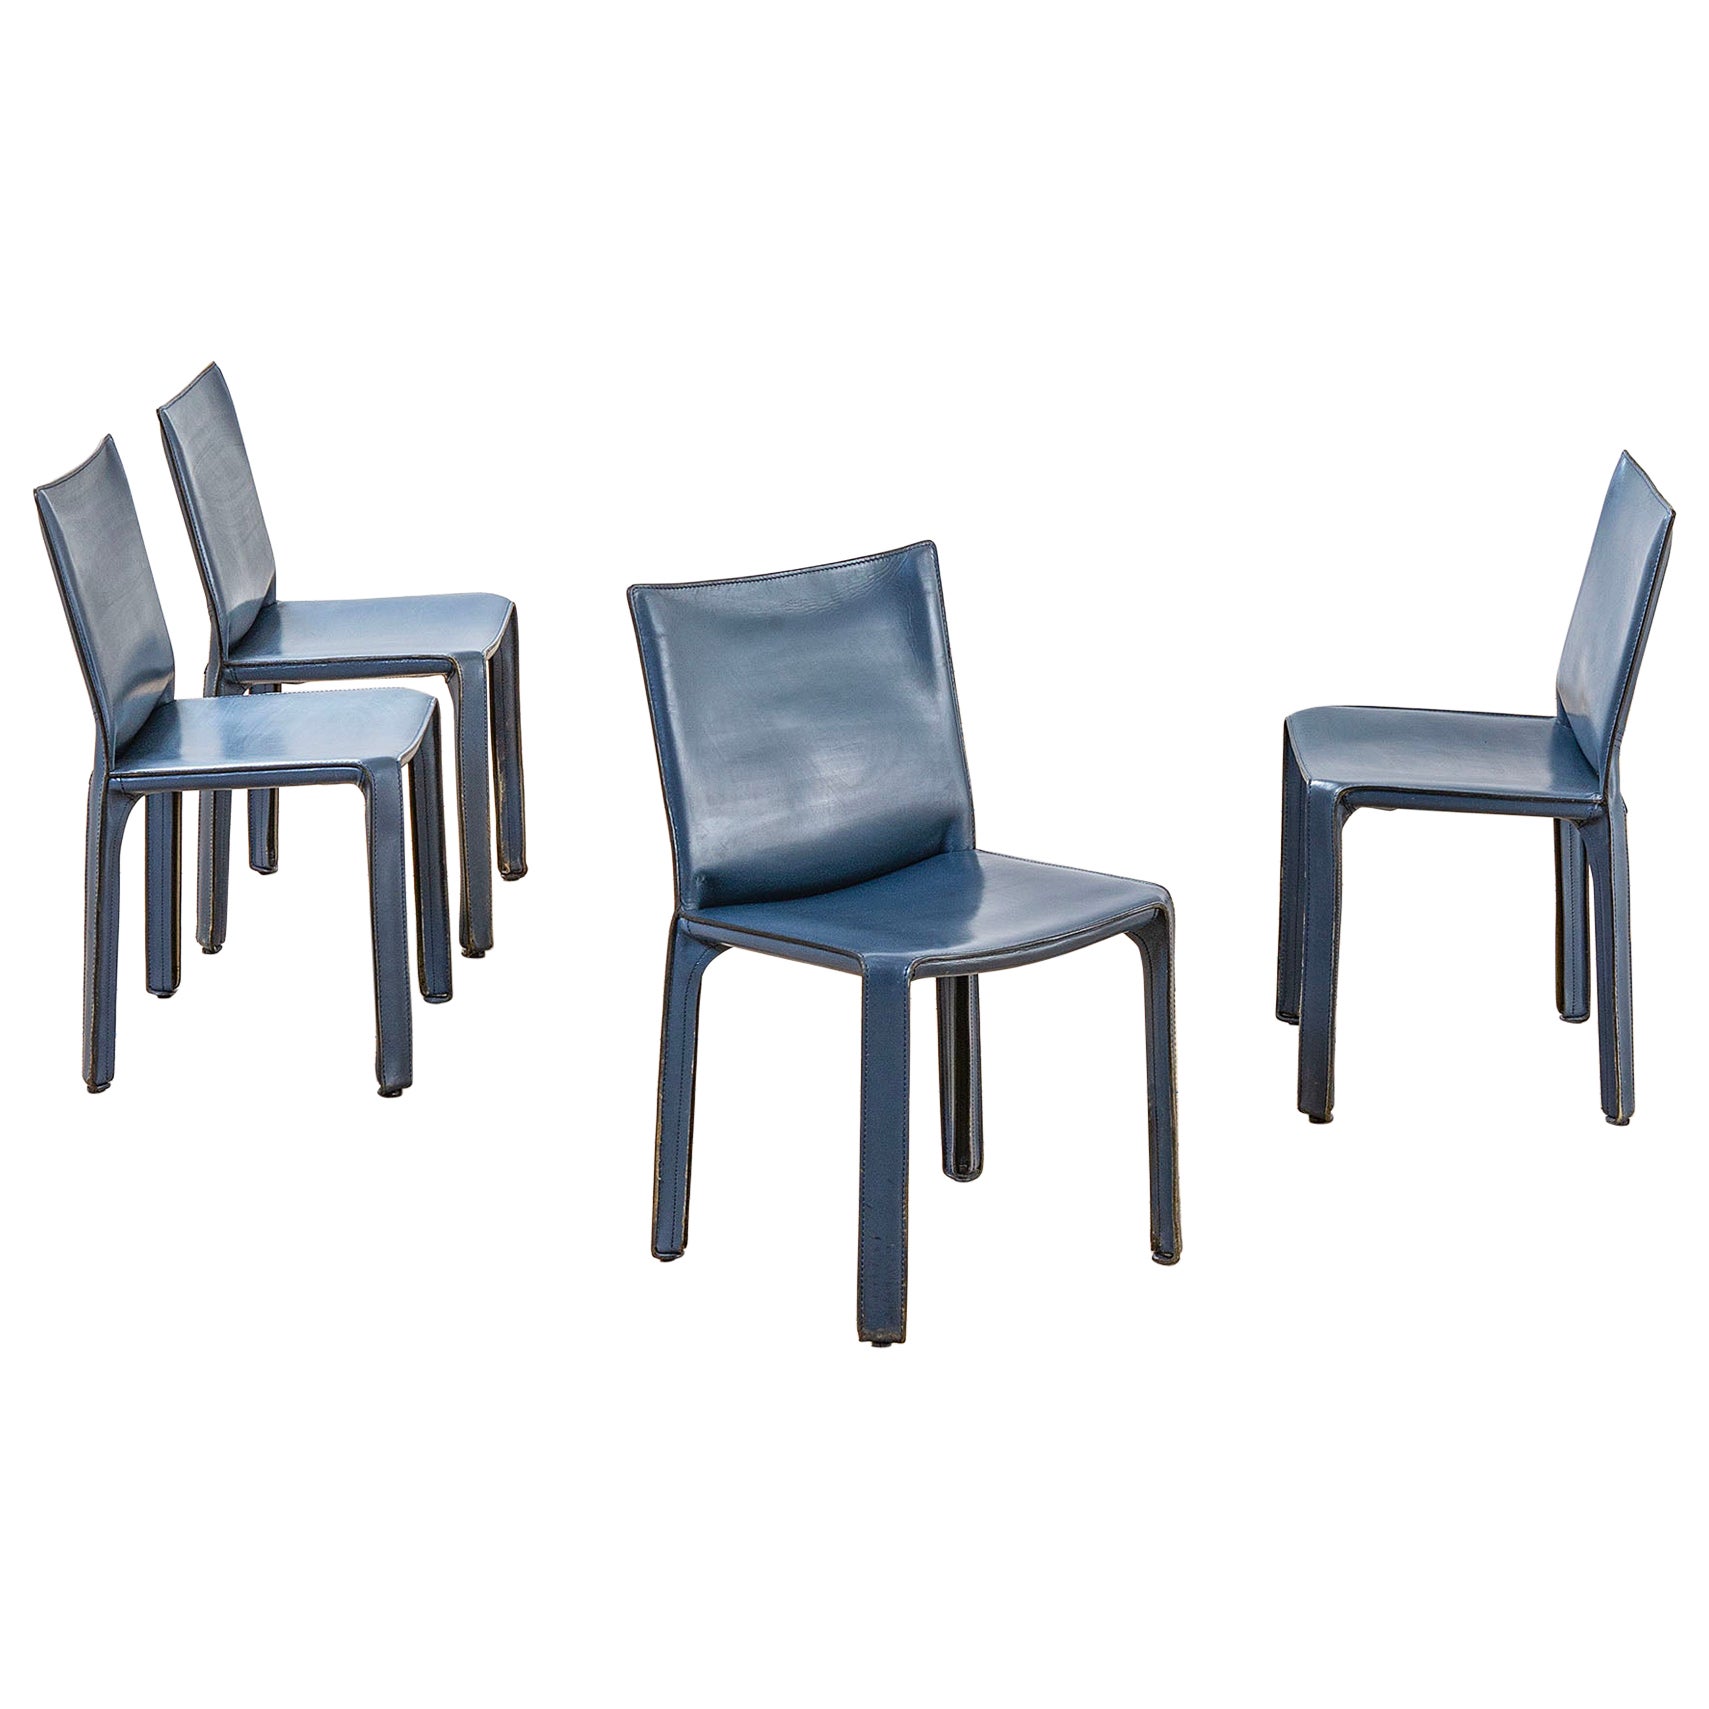 20th Century Mario Bellini Set of 4 Chairs mod. Cab in Blue for Cassina, 70s